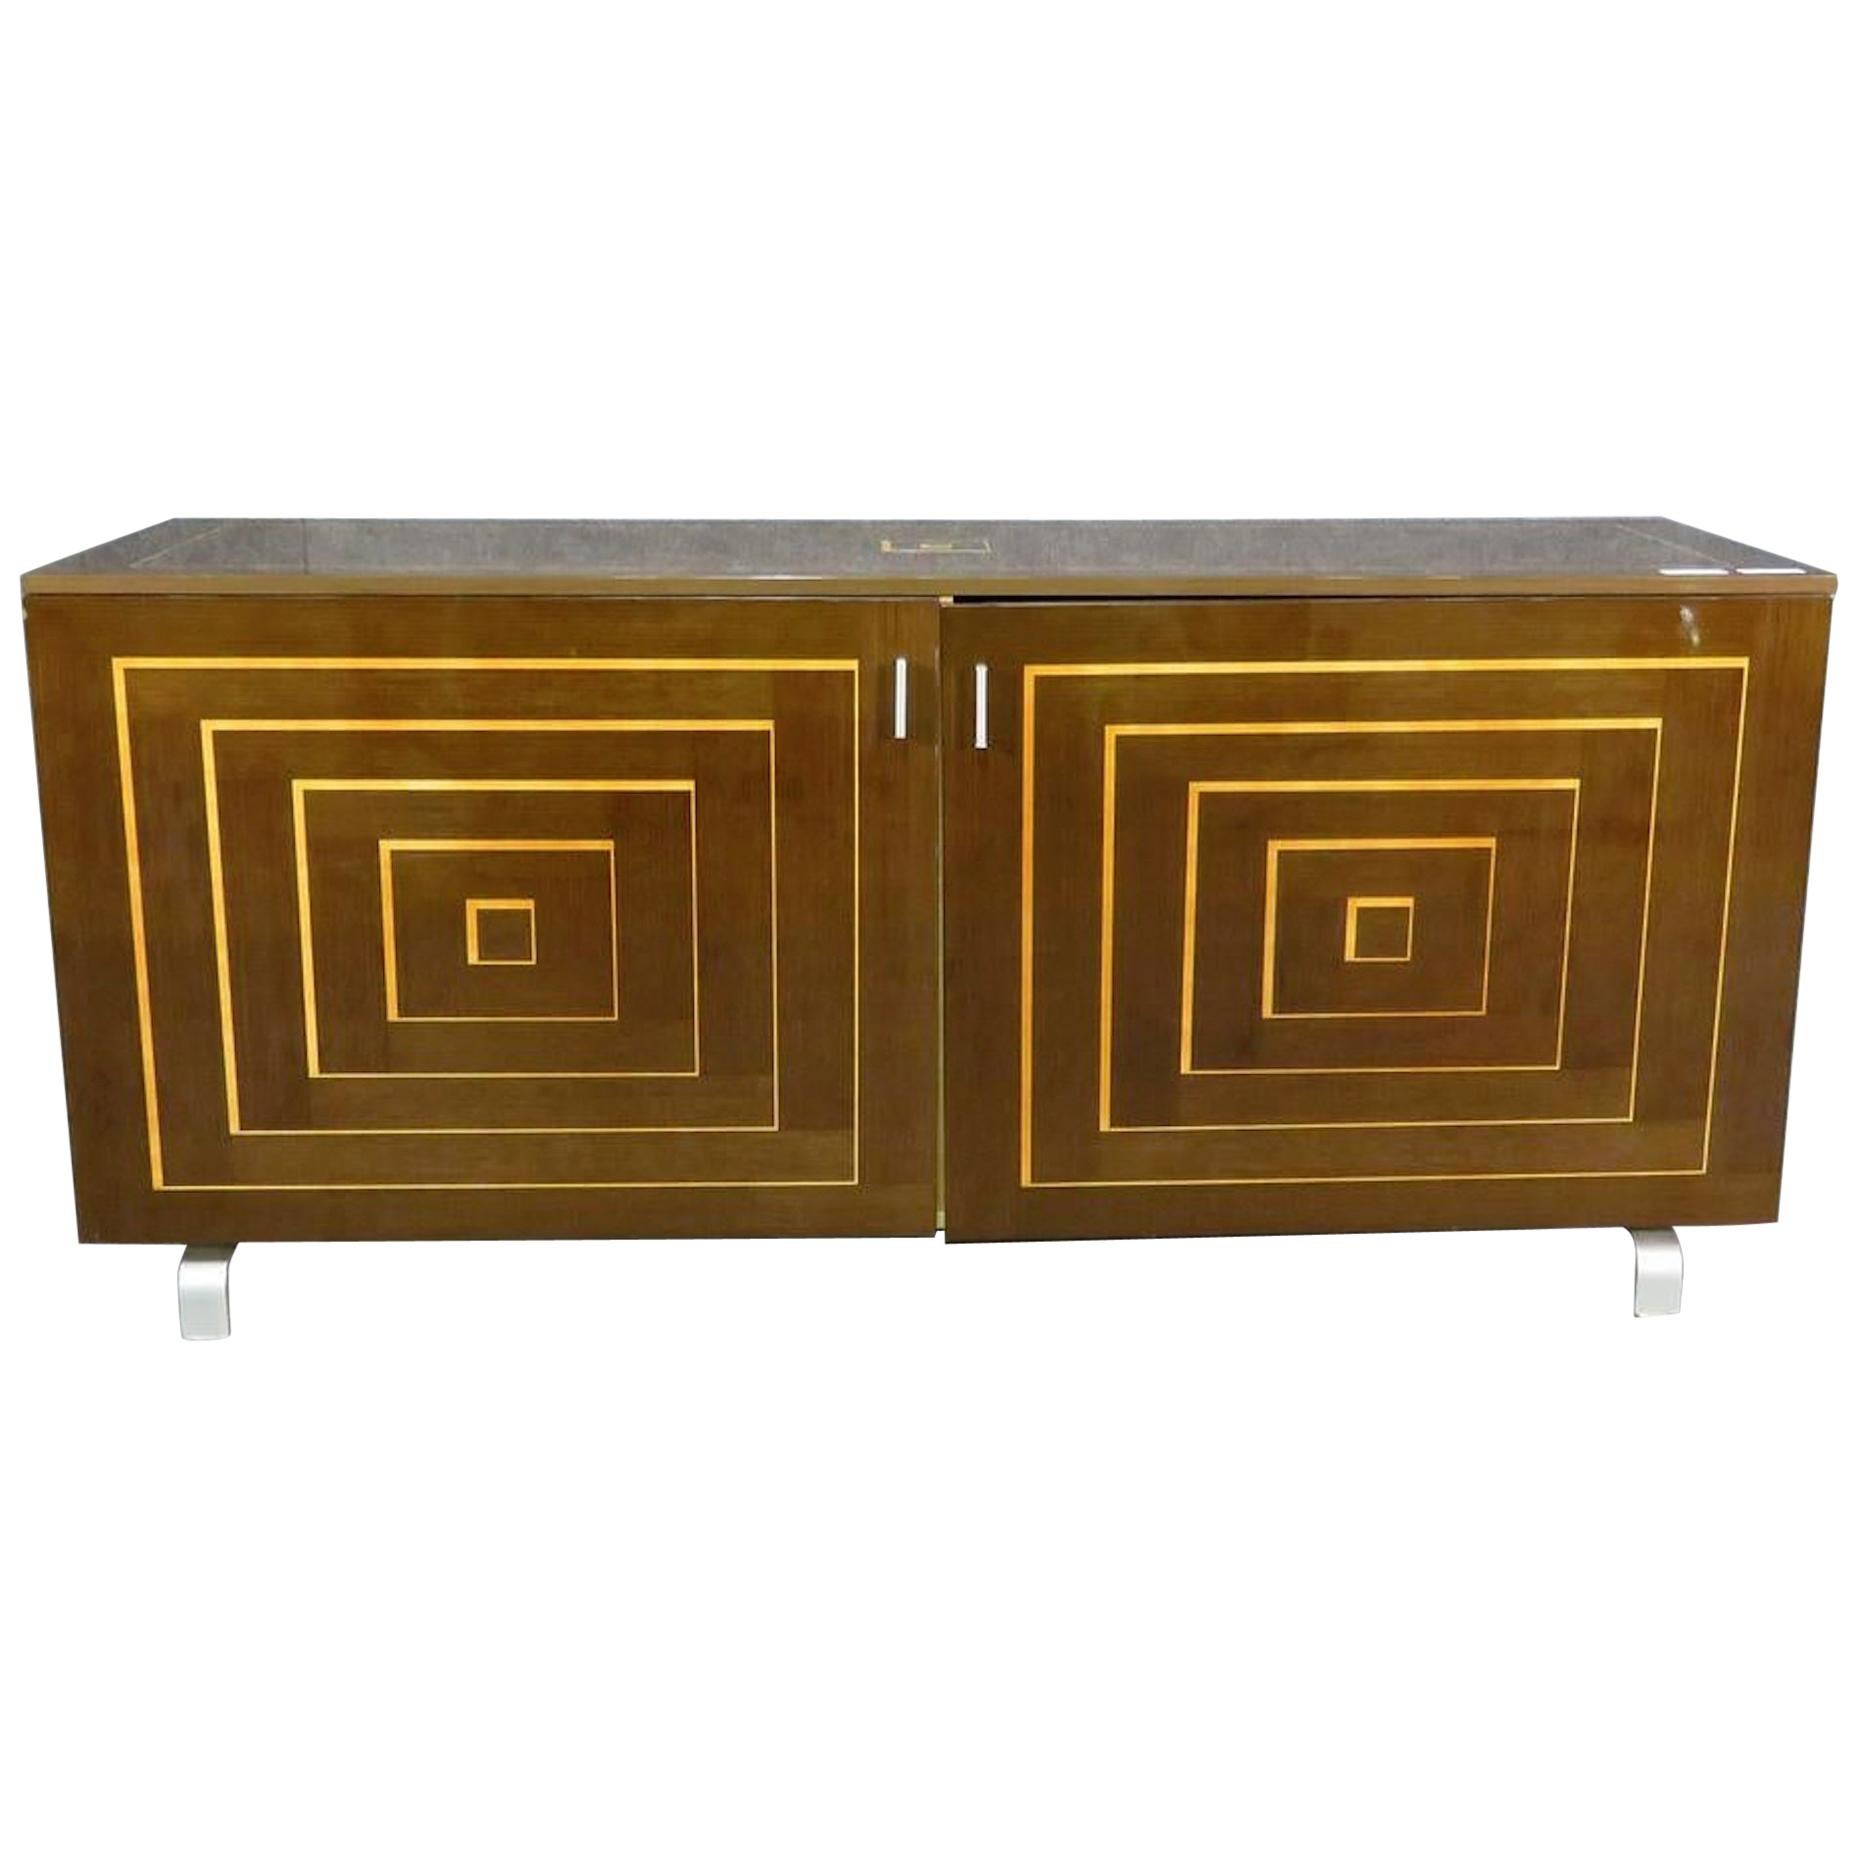 Beautiful Credenza with Inlay